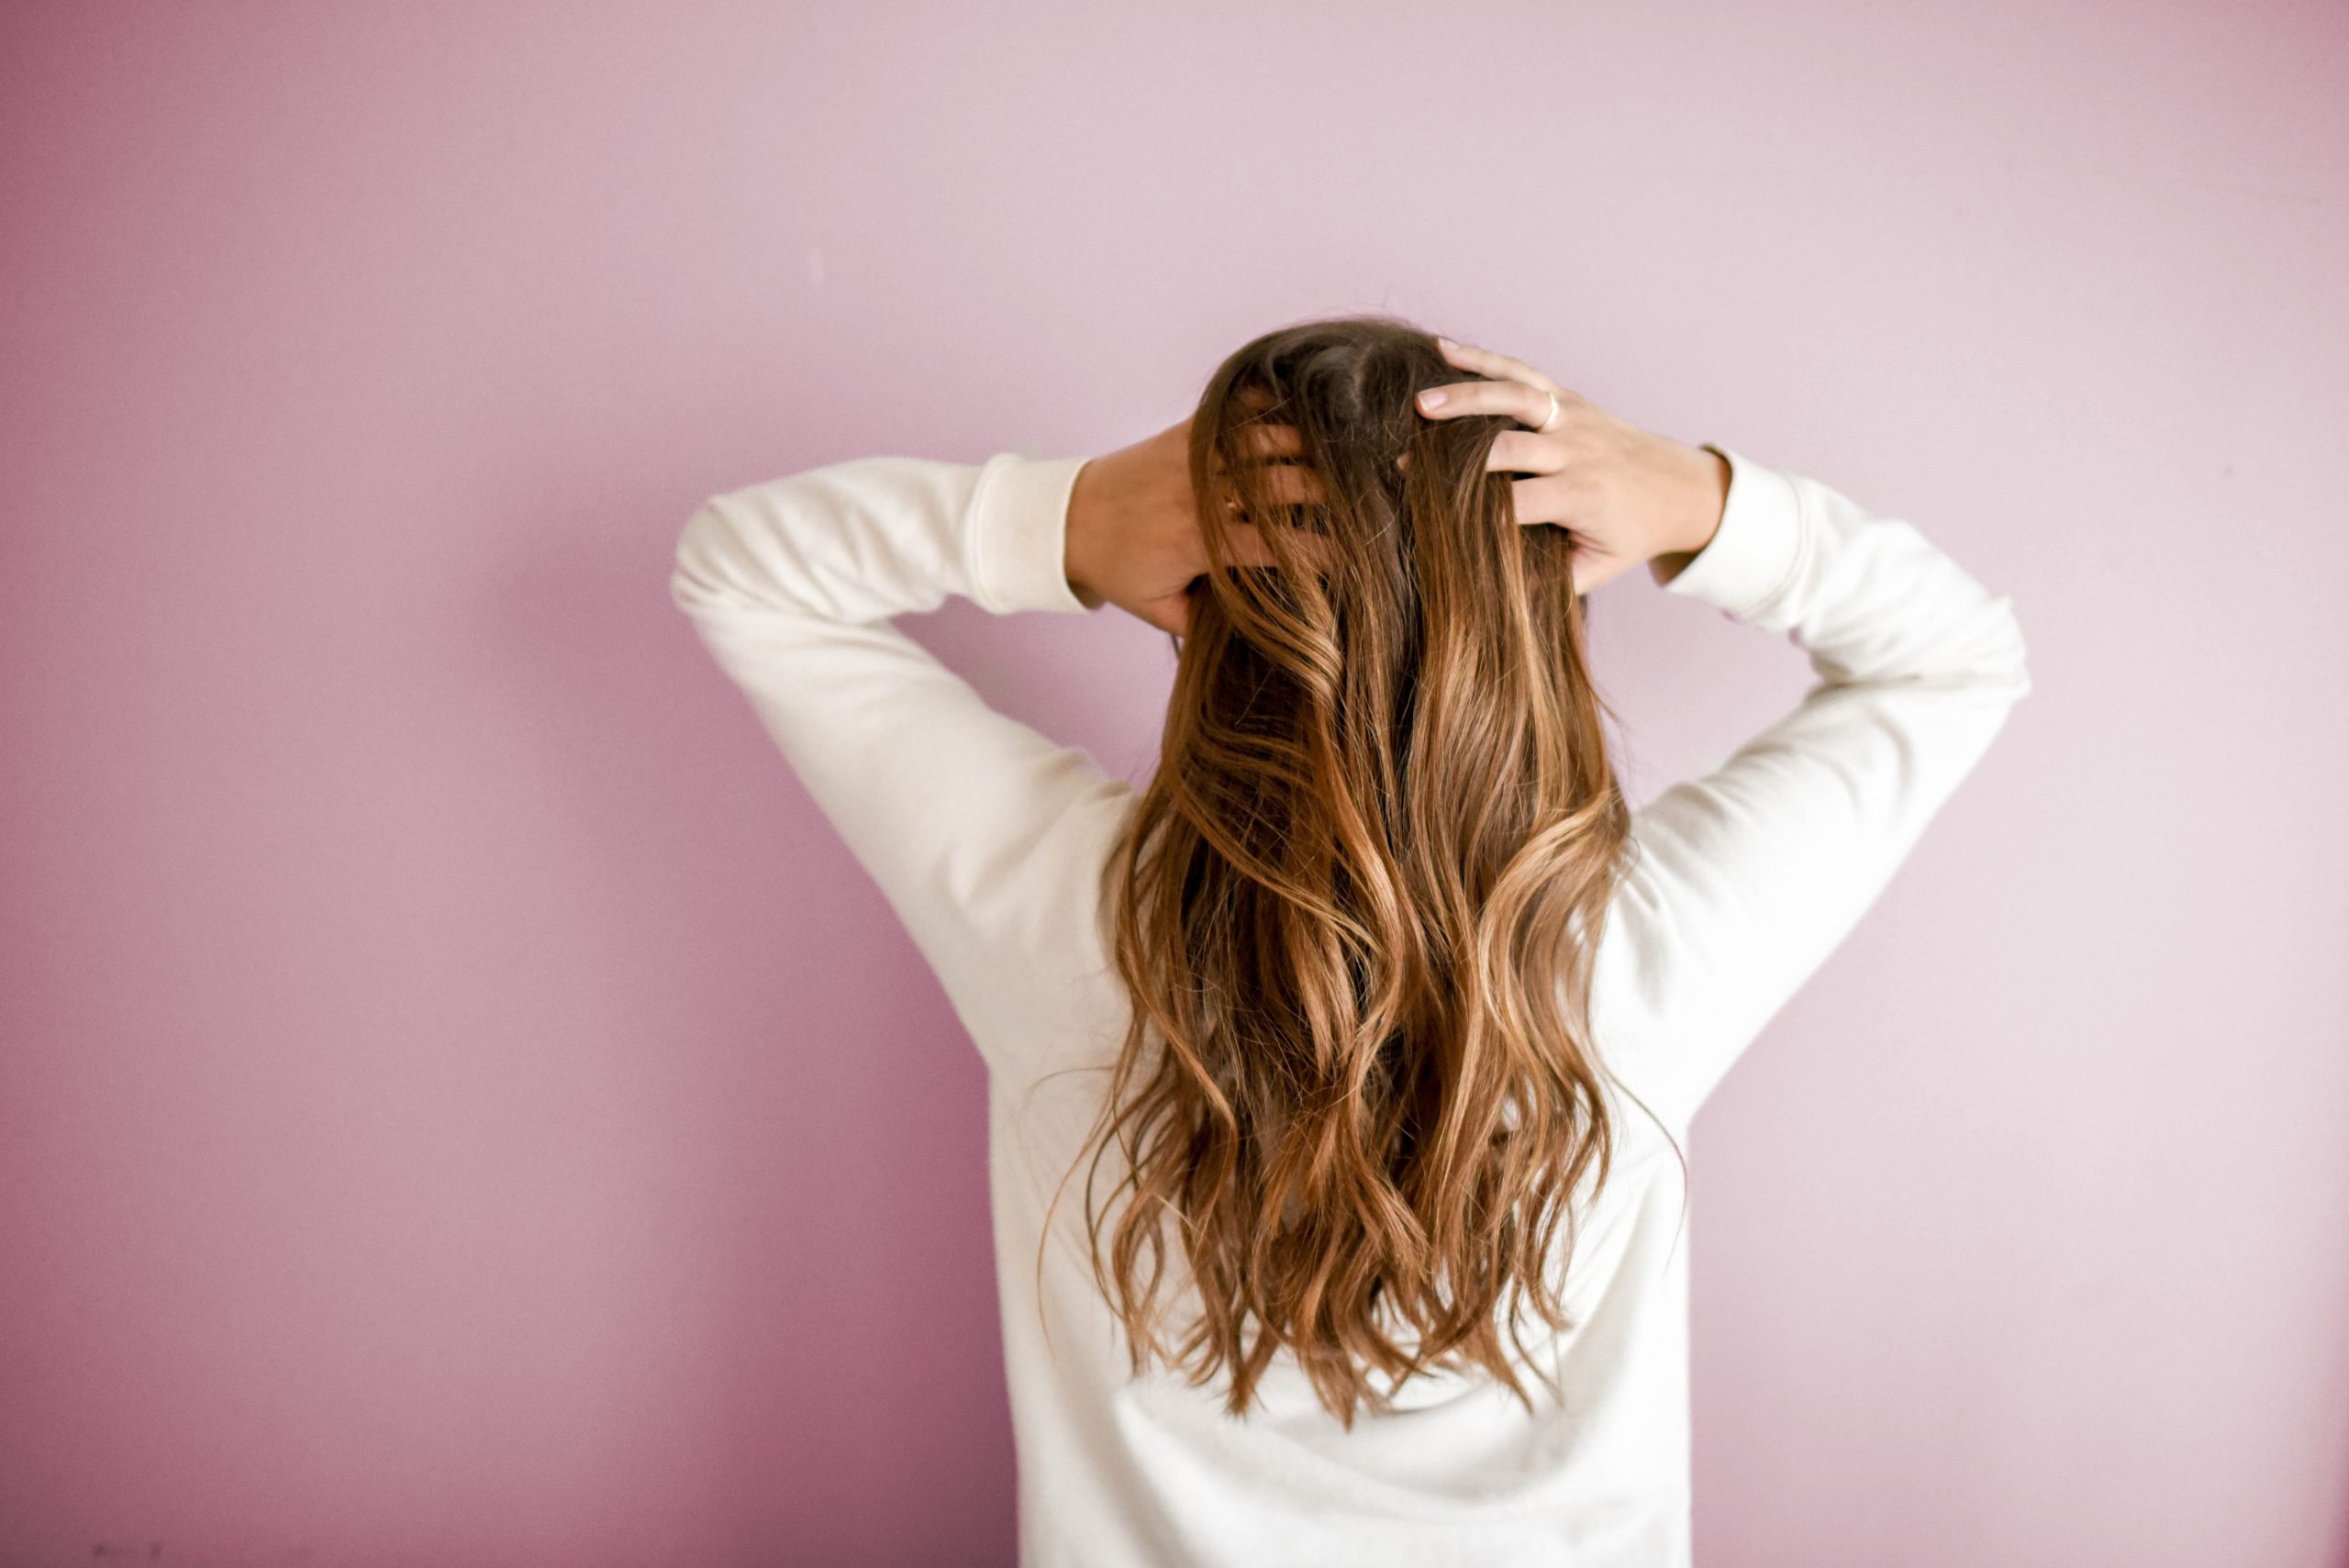 Can Hair Loss Caused By Stress Grow Back?